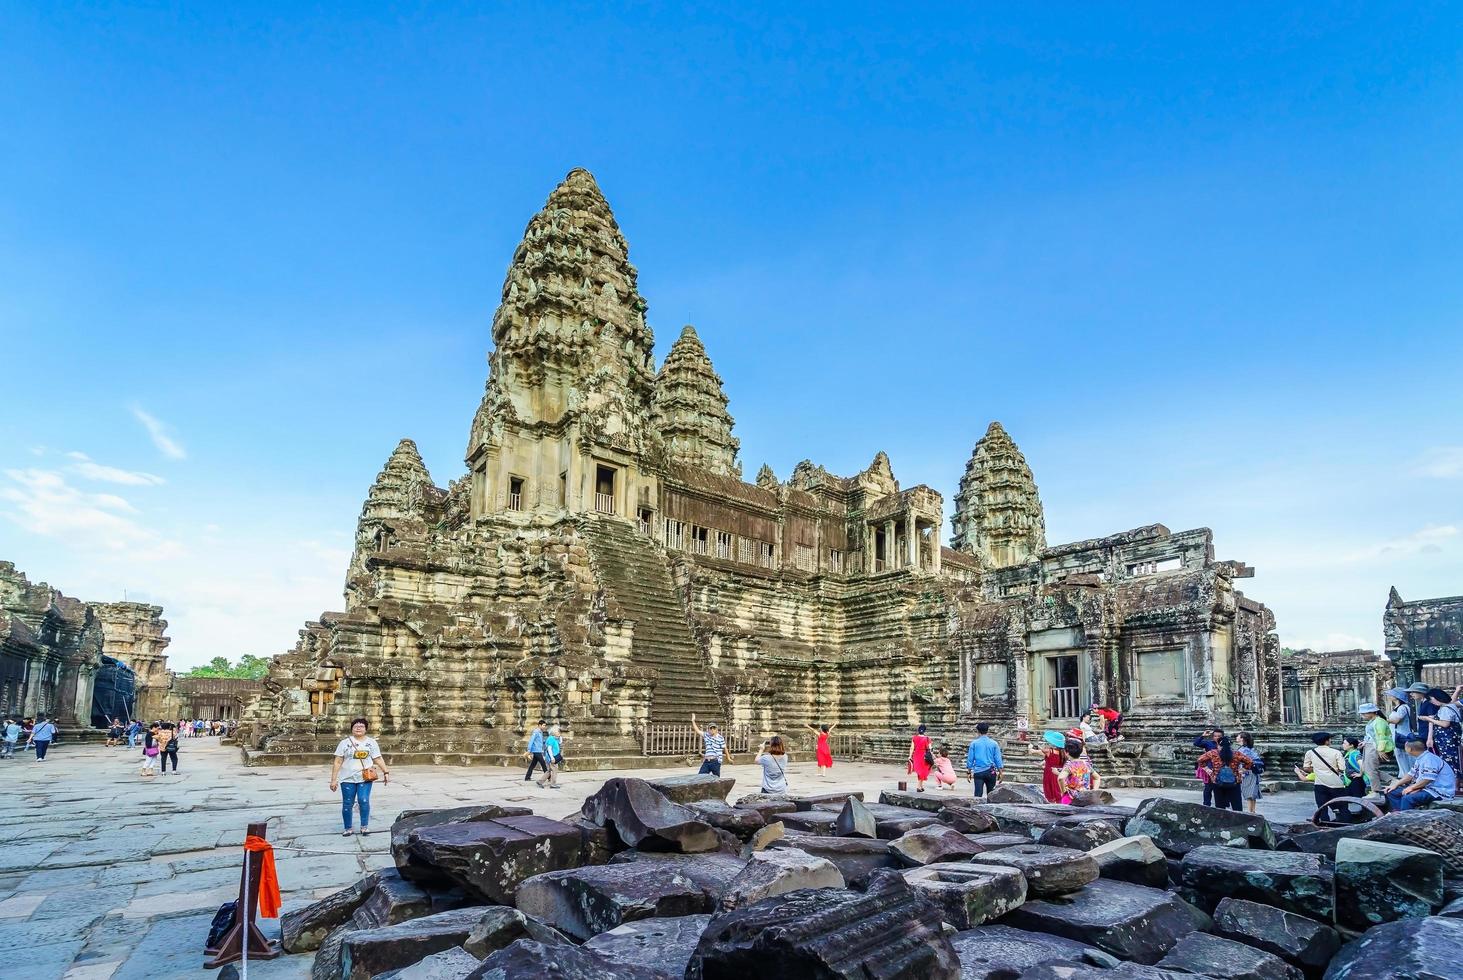 People at the Angkor Wat Temple, Siem Reap, Cambodia photo